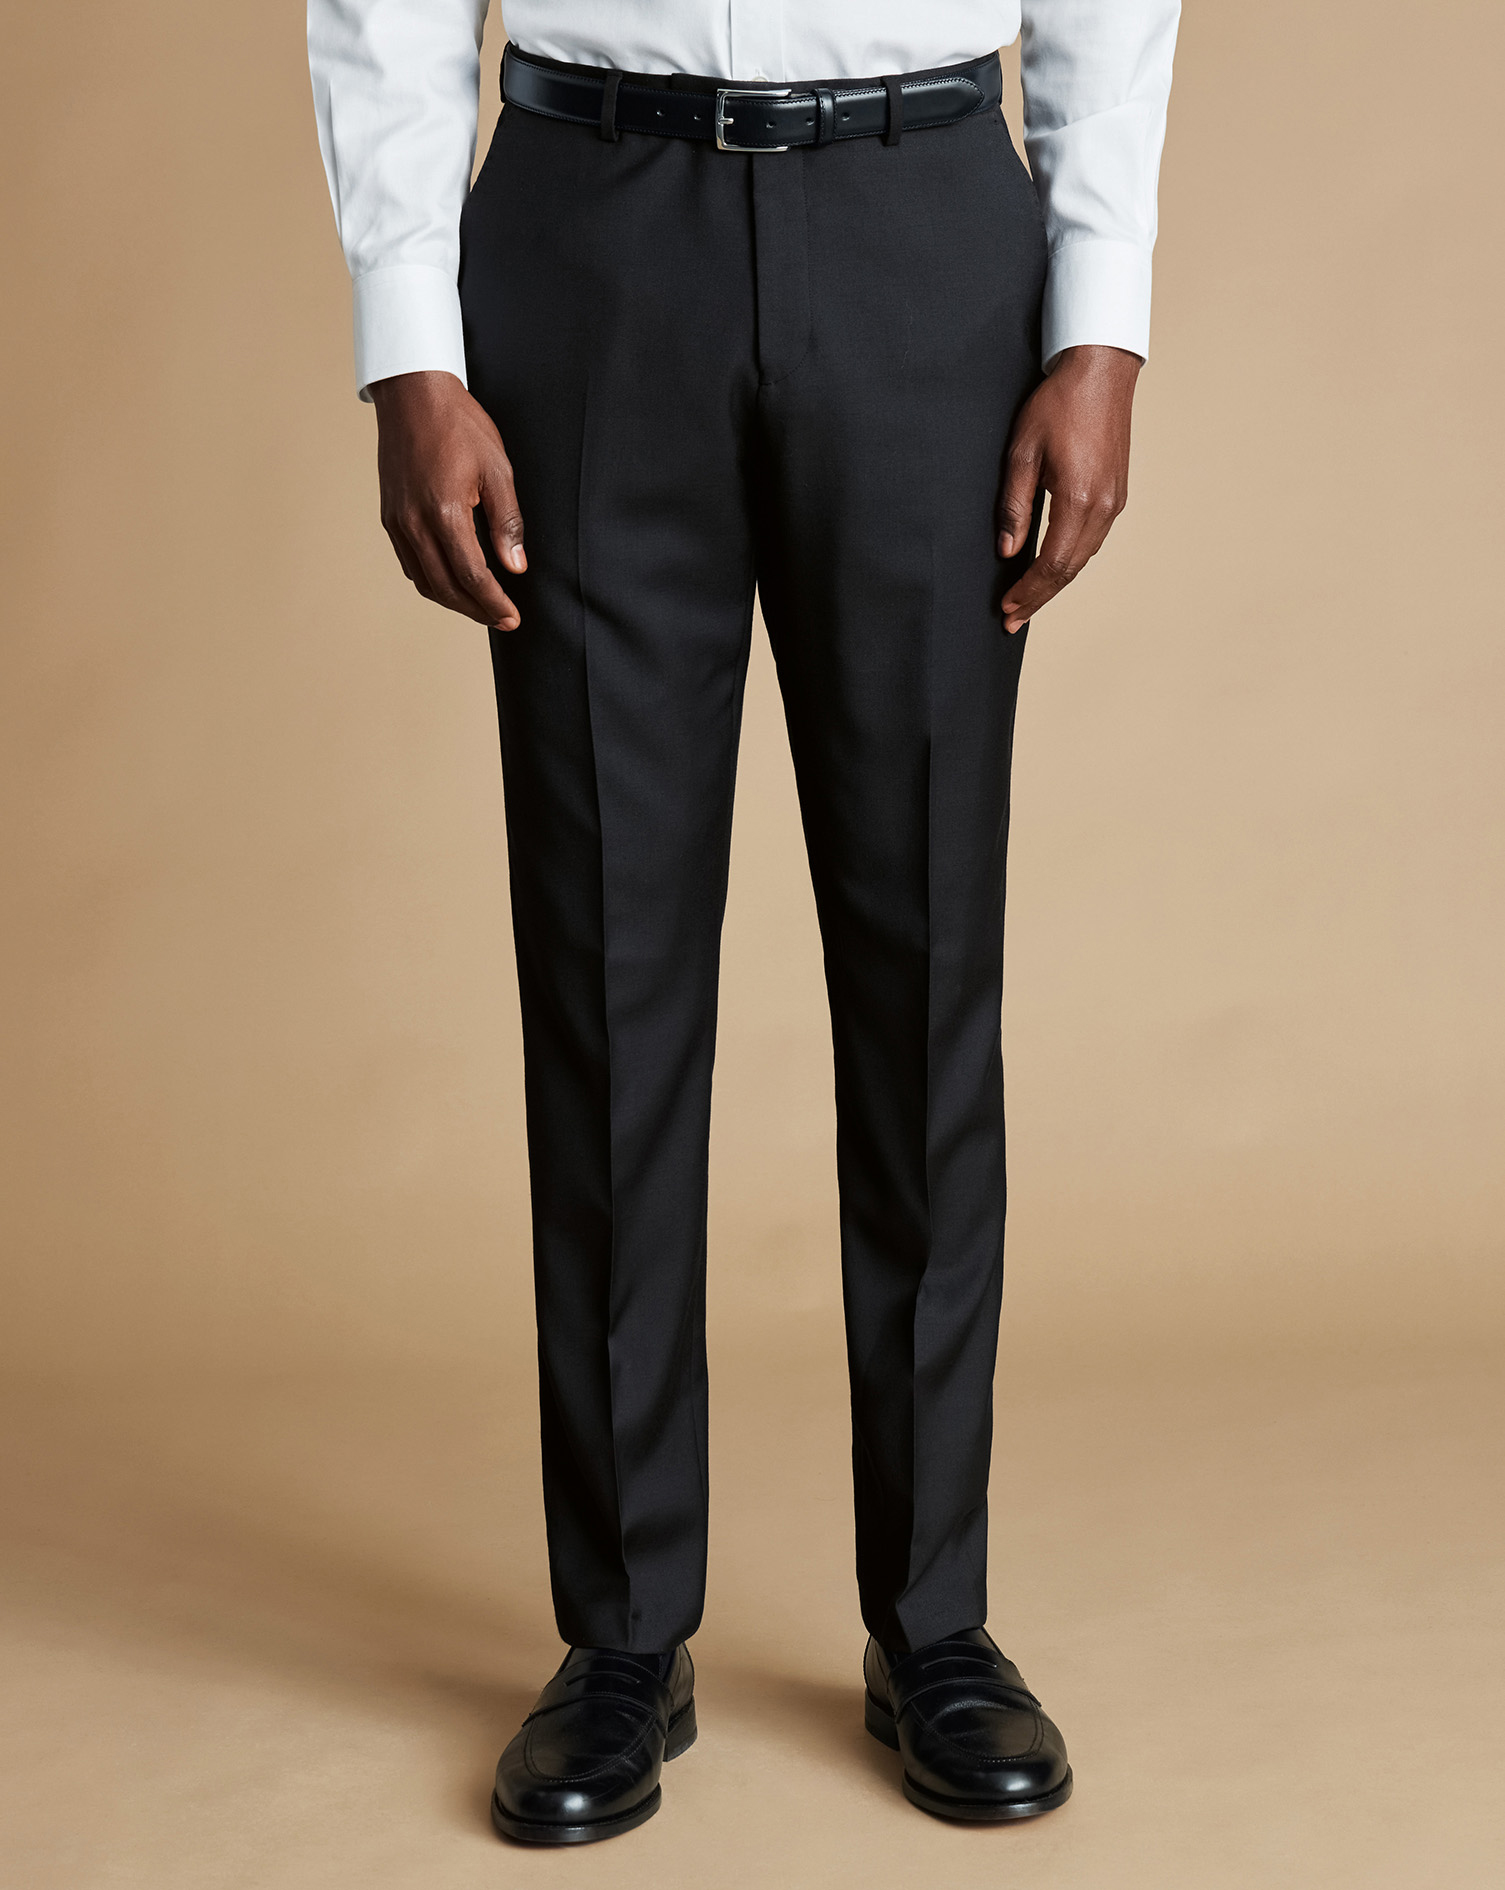 Natural Stretch Twill Suit Trousers - Black Size 36/32
